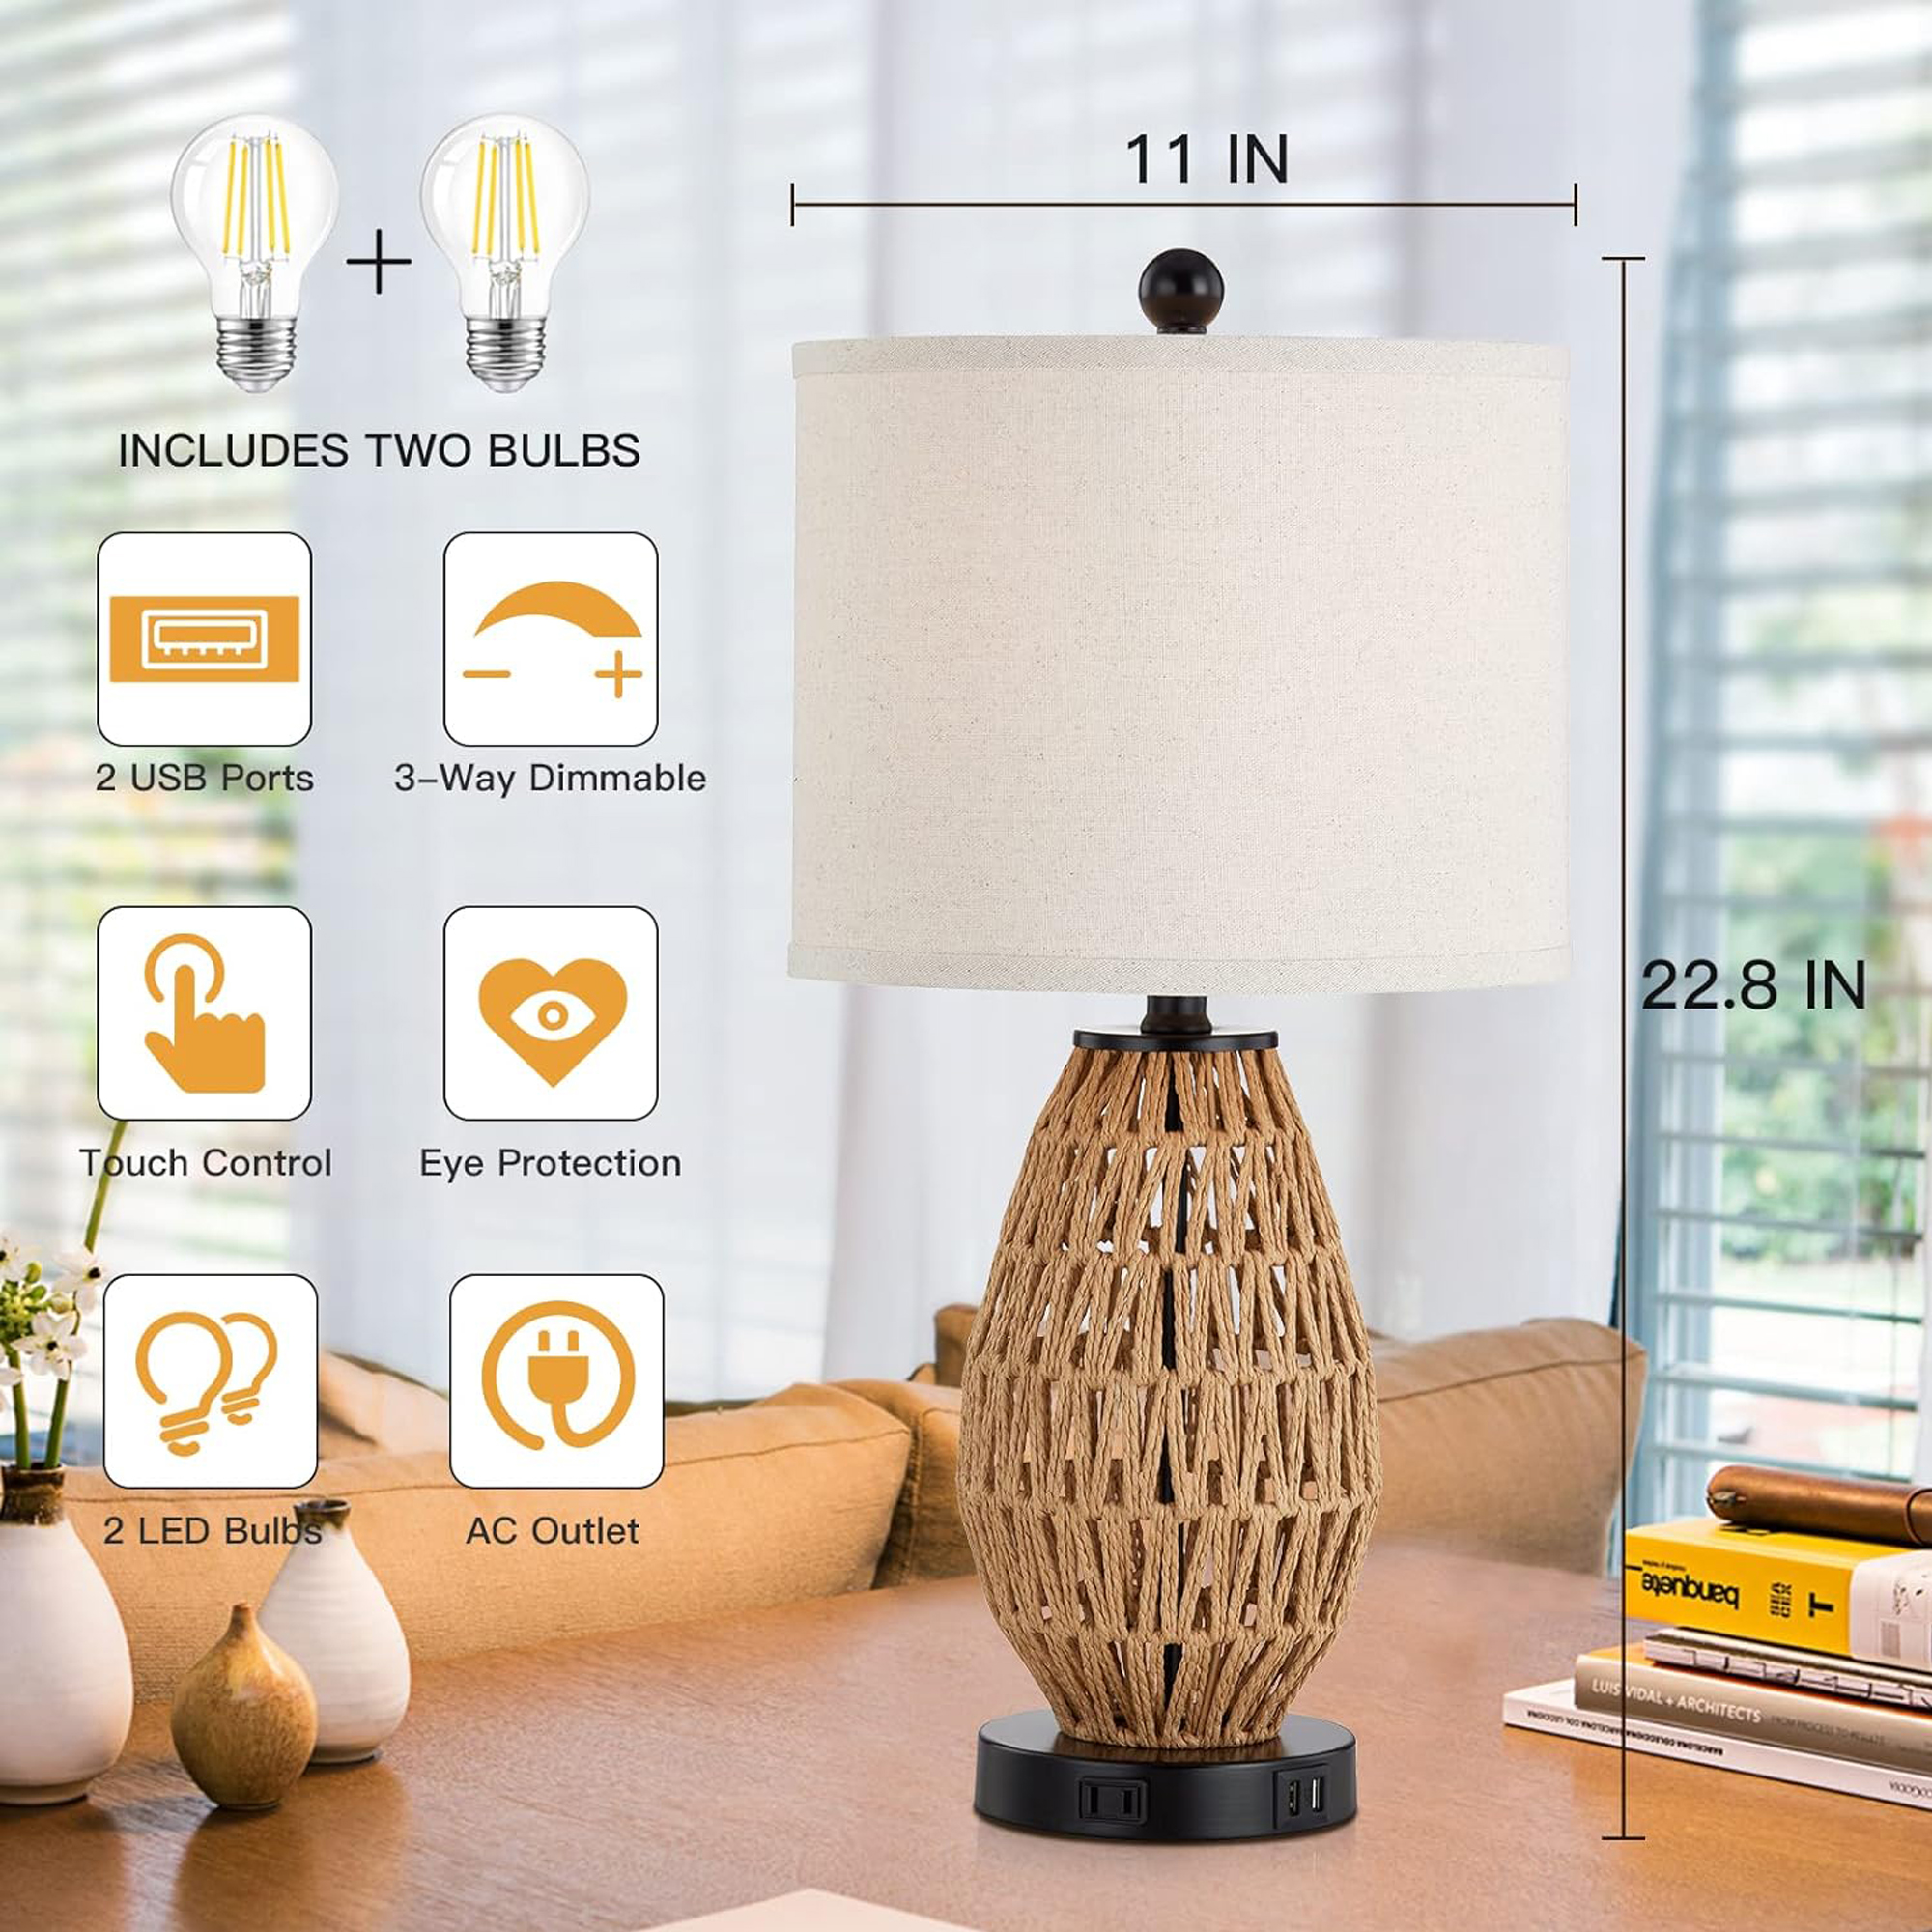 Cinkeda Touch Control Table Lamp with USB Ports AC Outlet Oatmeal Braided Rattan 3 Way Dimmable Bedside Lamp for Living Room Bedroom(1 Bulb) - image 5 of 8